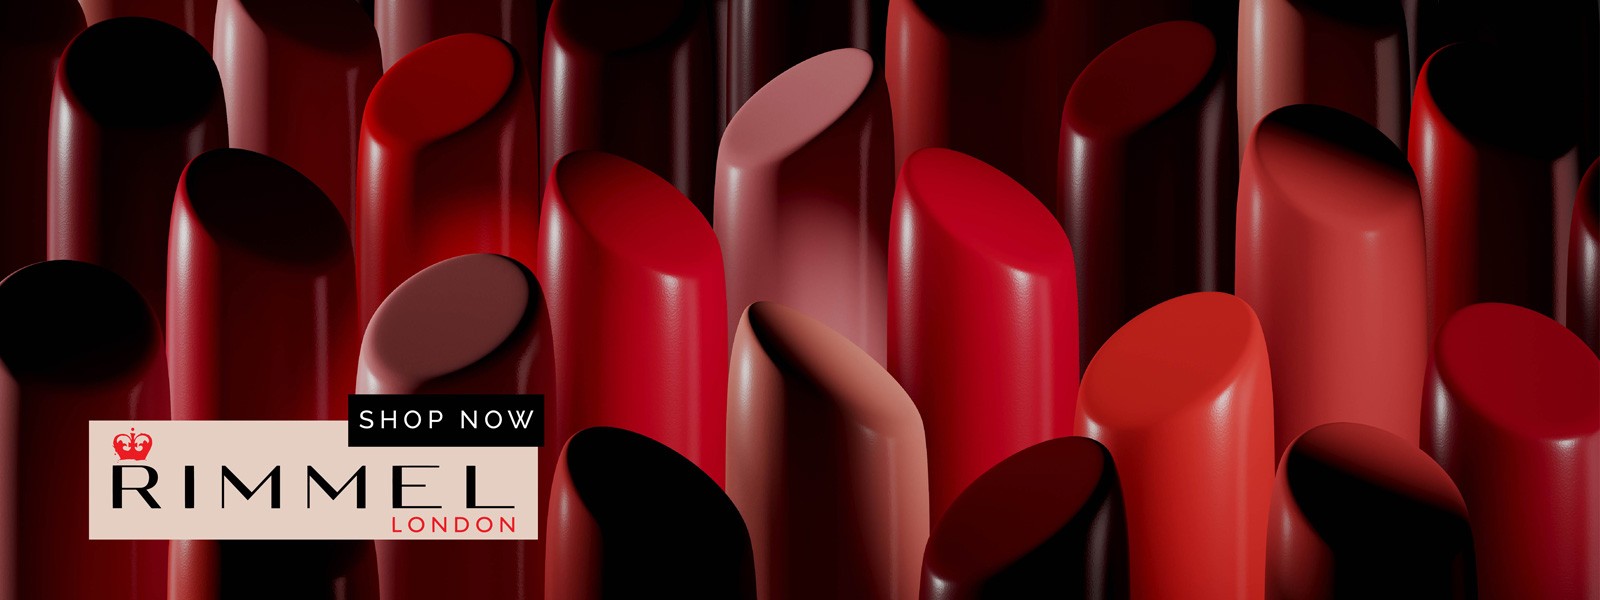 RIMMEL LONDON Makeup for women at the best prices